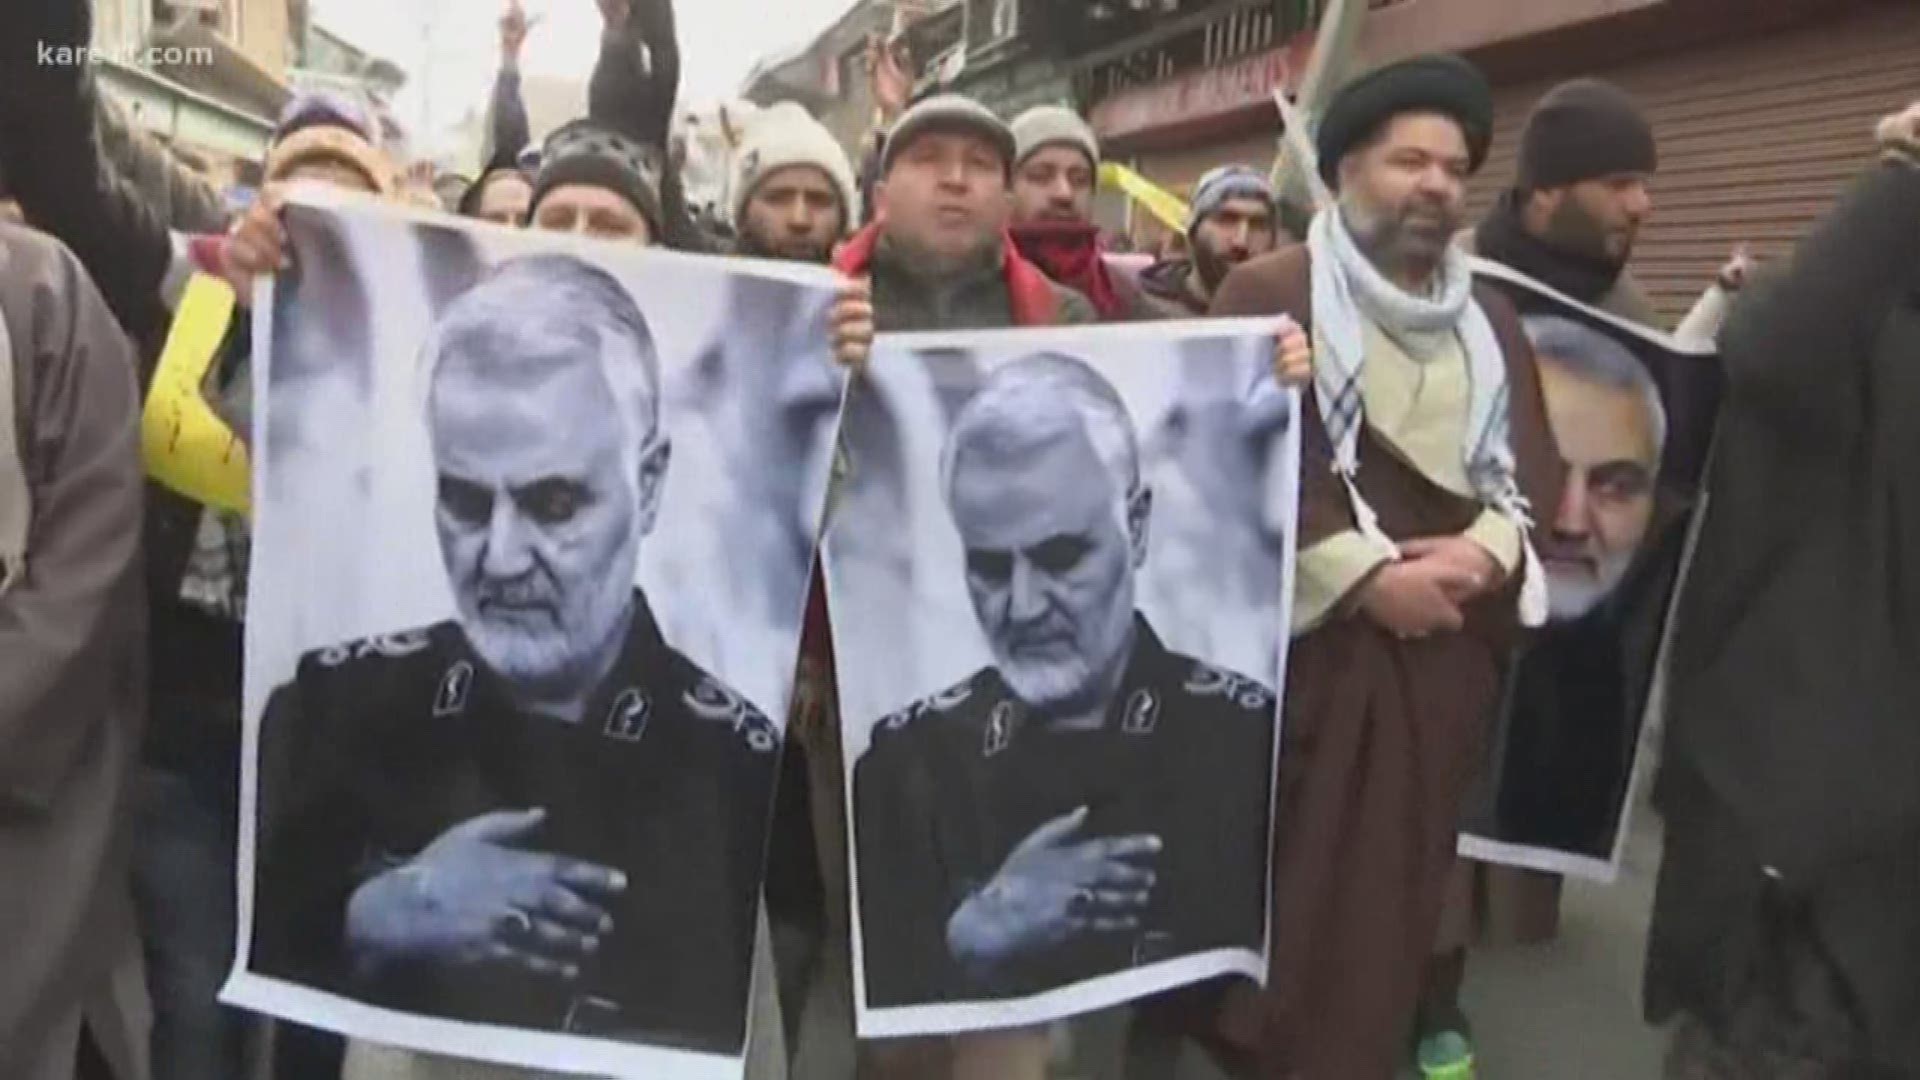 The world waits to see how Iran will respond to the US killing of military leader Qasem Soleimani. But current tensions between those two nations date back to 1950s